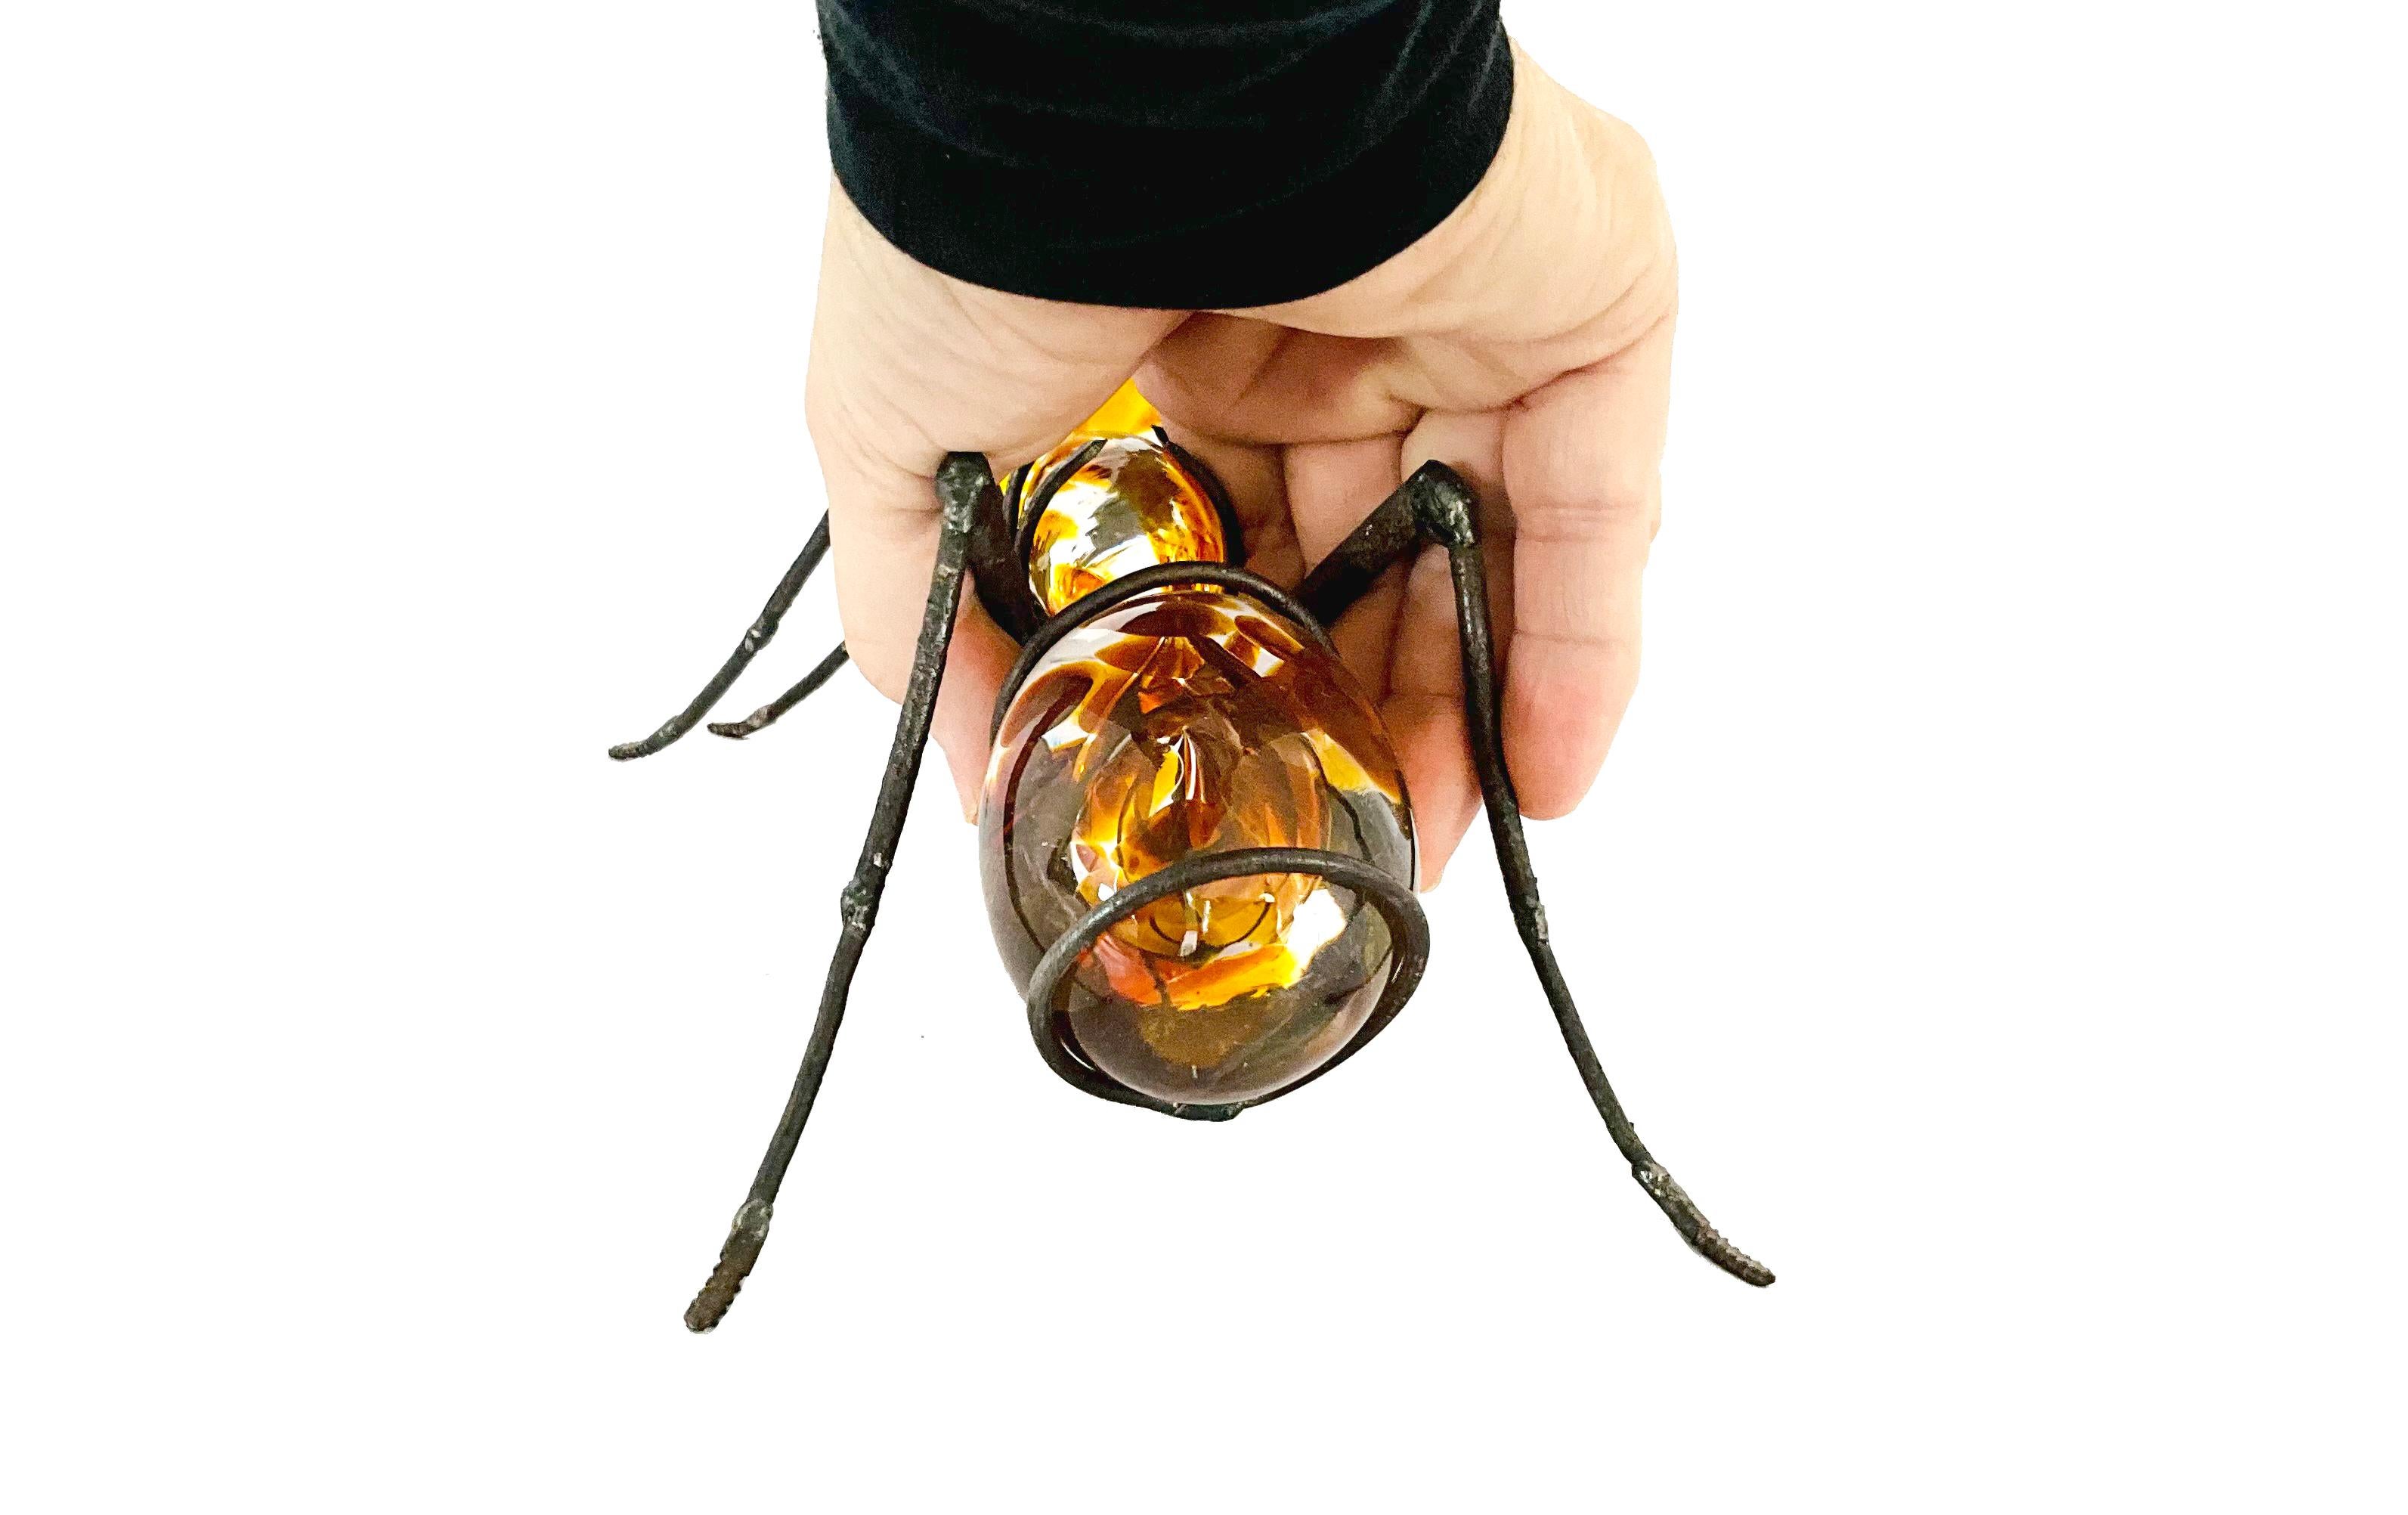 Hand-Blown Glass Ant, Recycled Steel and Dark Brown Crystal Parts  - Sculpture by Marcos Romero Gallardo